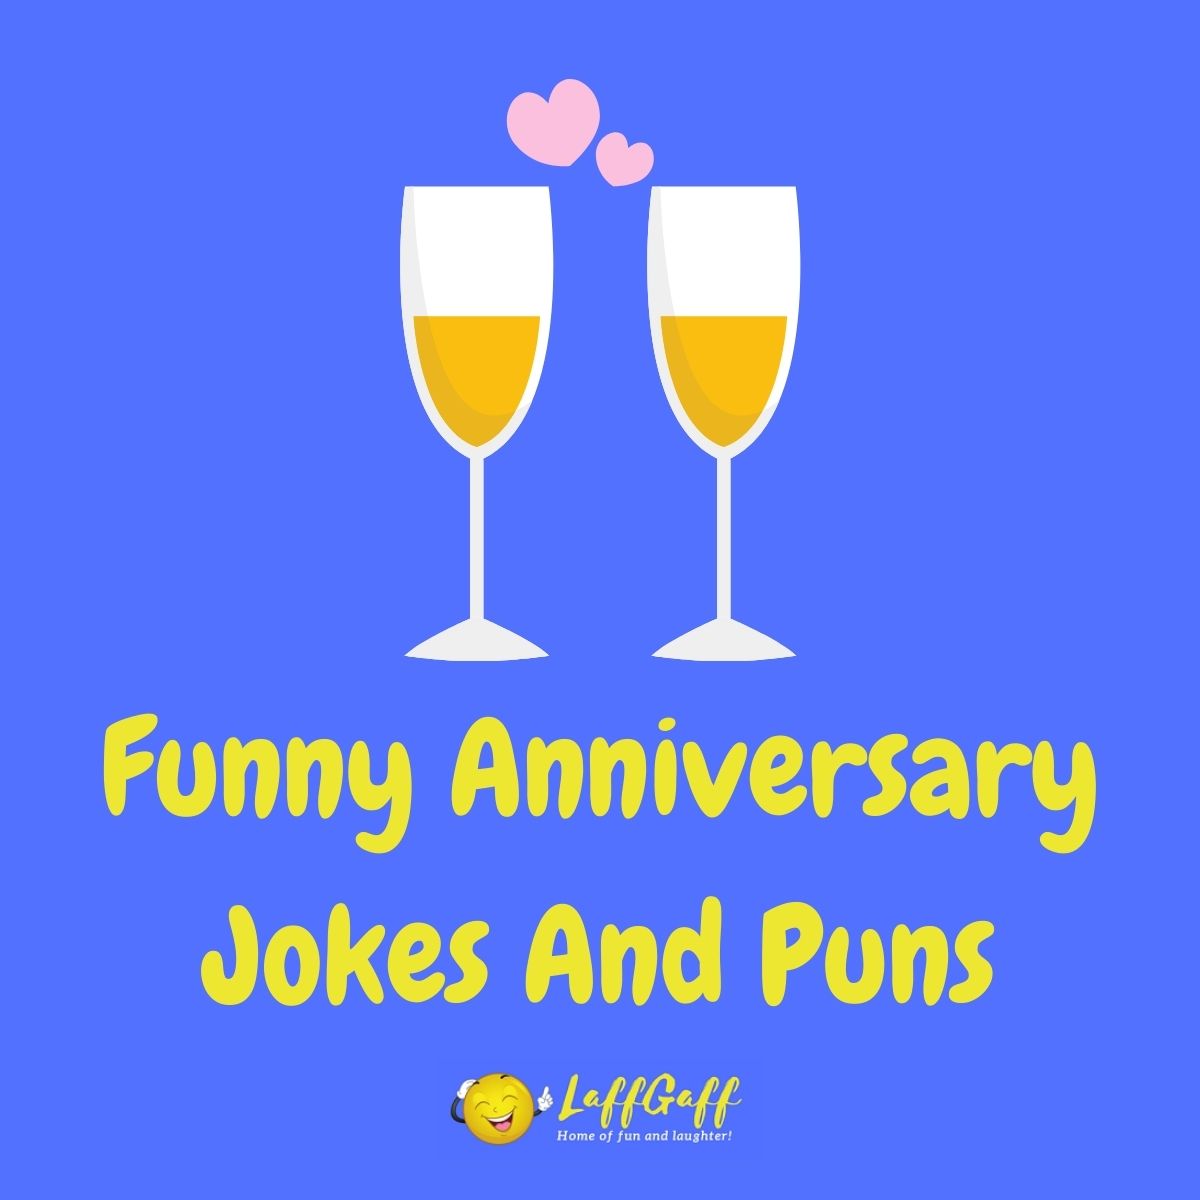 22 Hilarious Anniversary Jokes To Mark The Special Occasion!